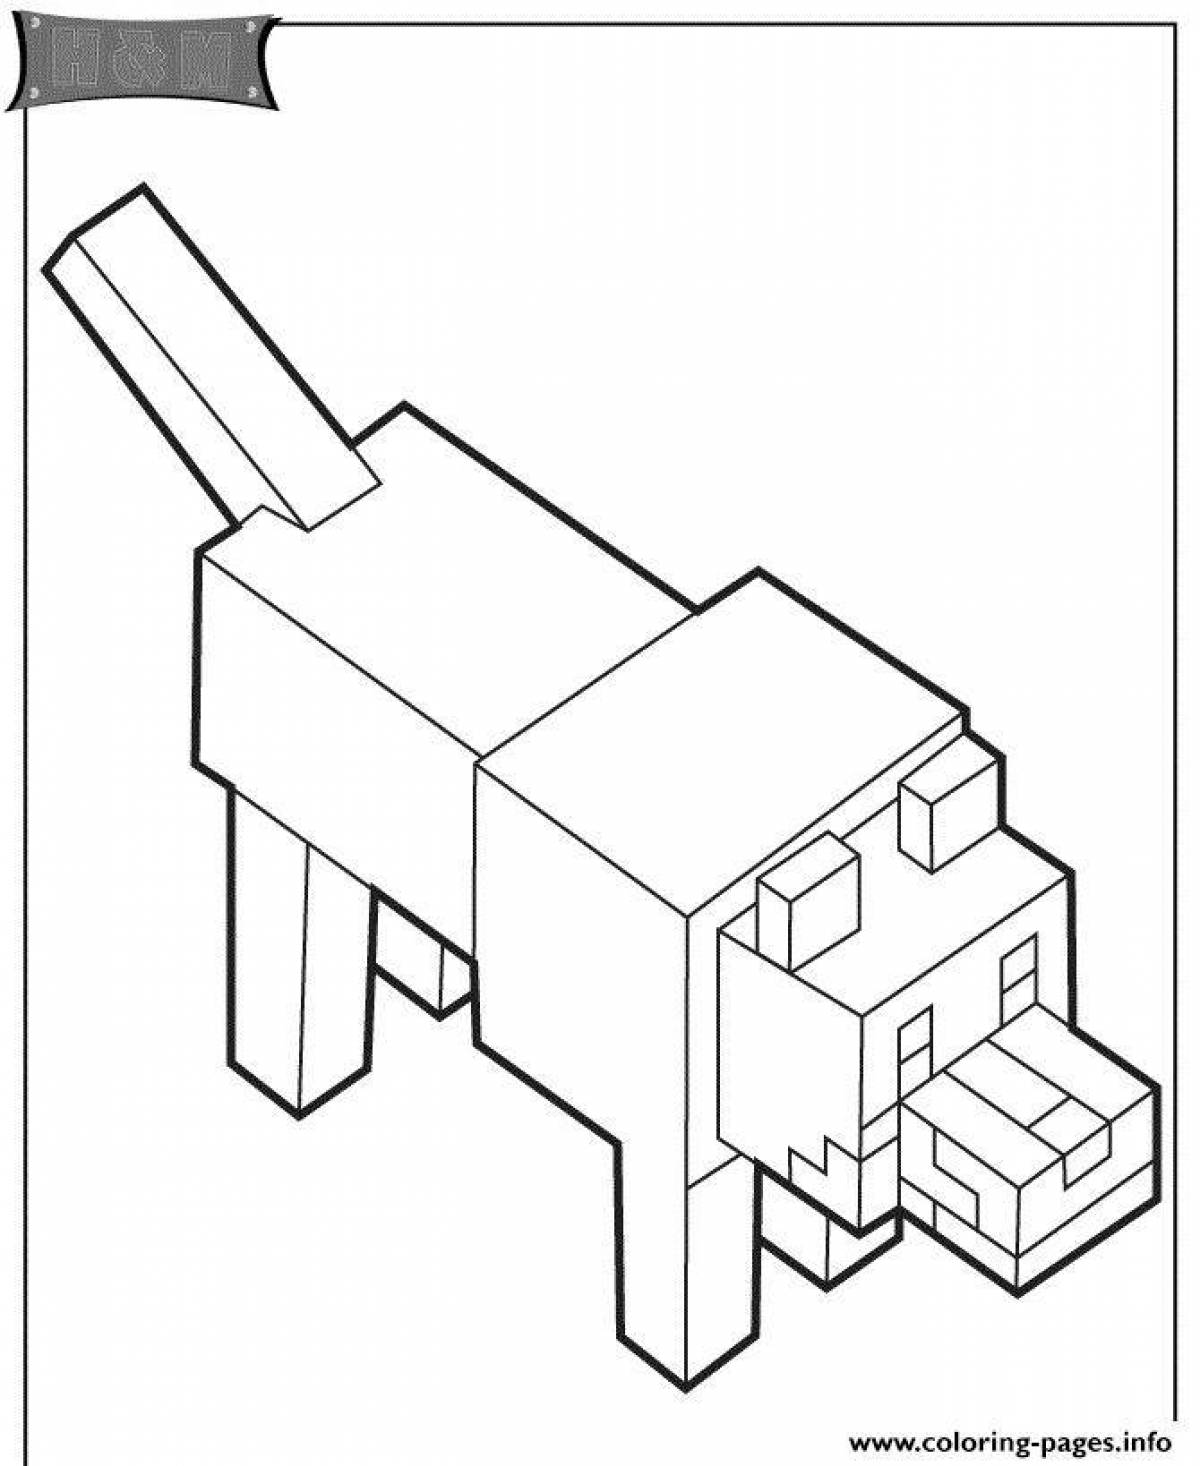 Magic minecraft dog coloring page